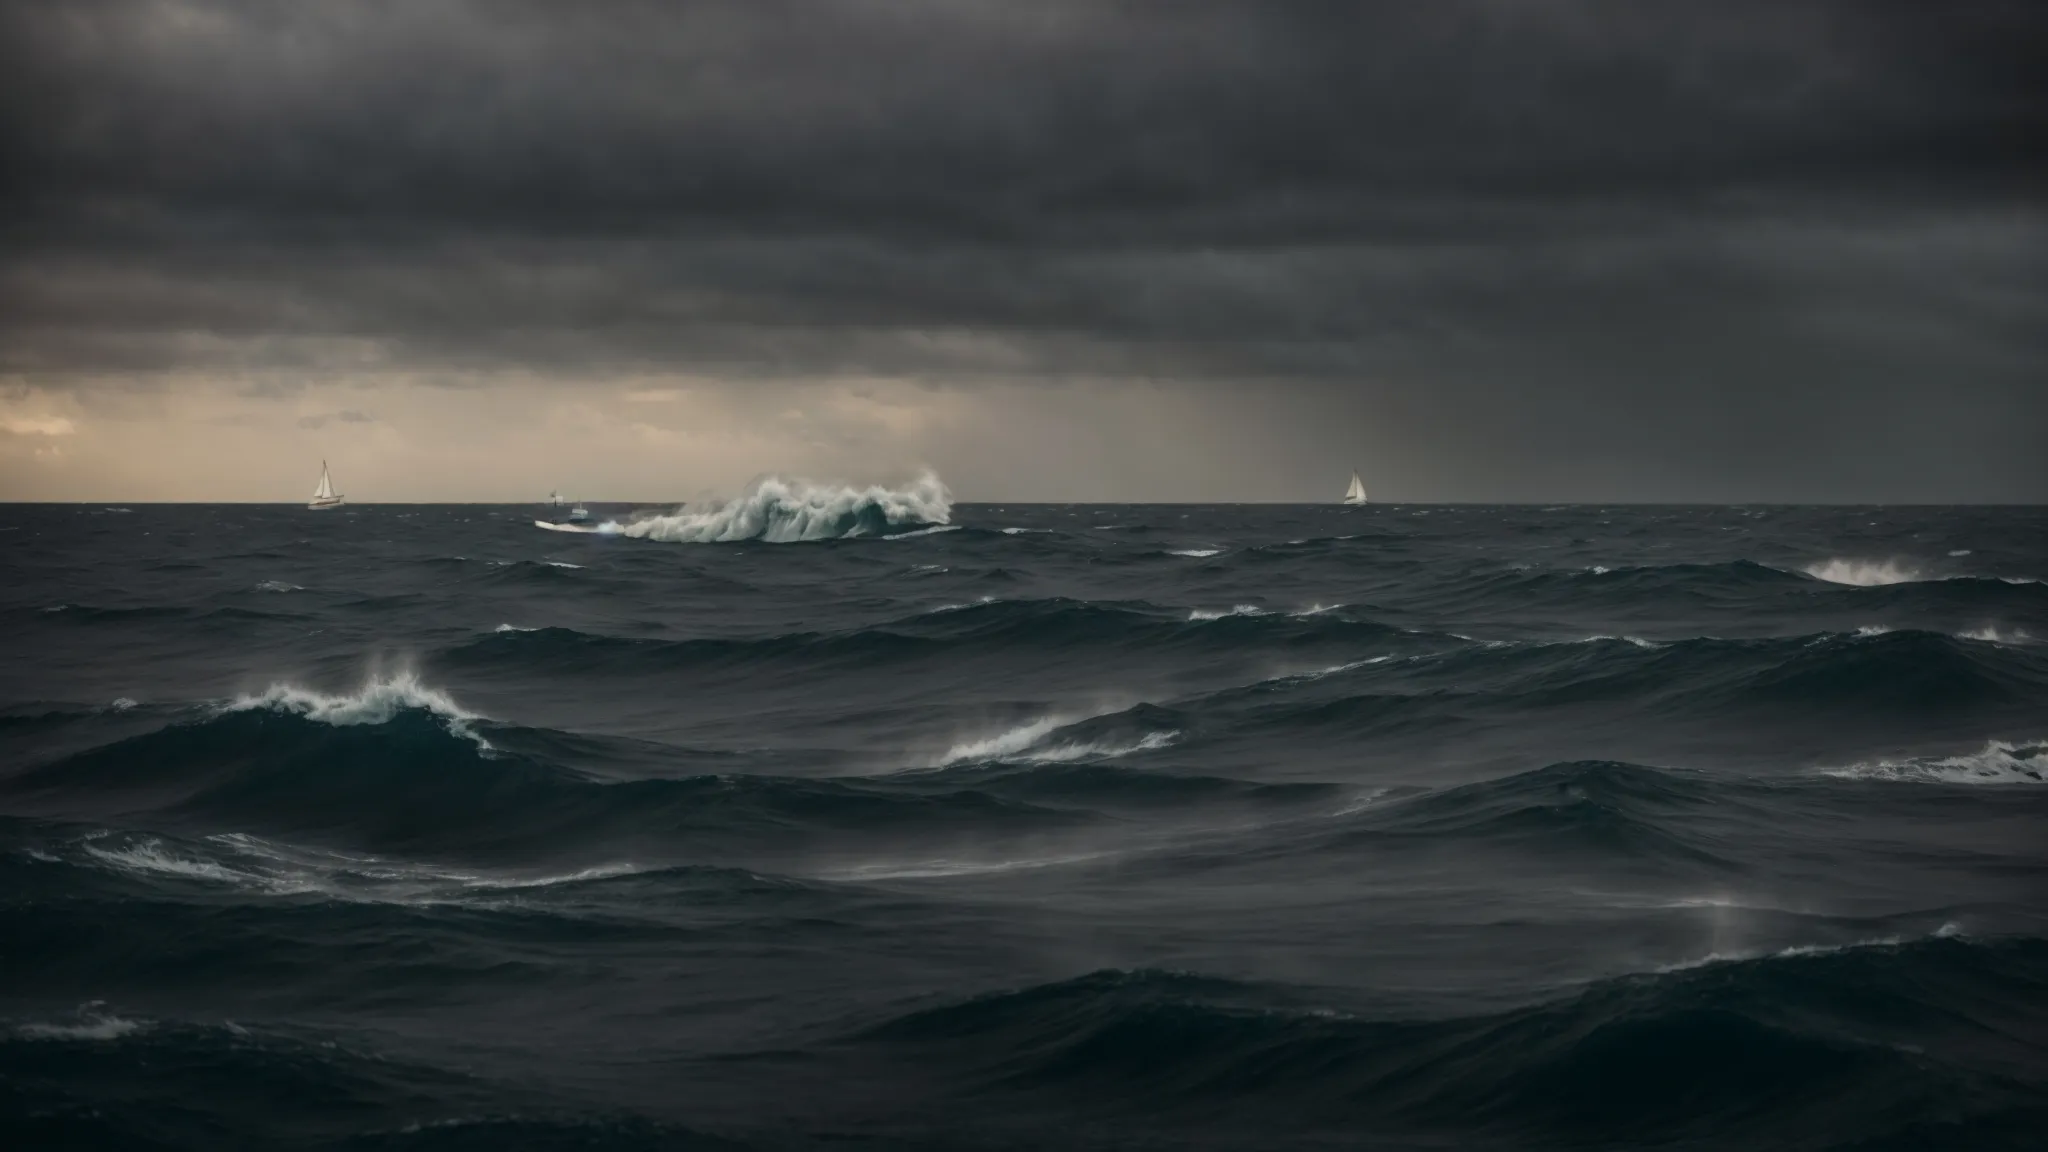 a sailboat glides through choppy waters, guided by a distant lighthouse amidst a darkening sky.